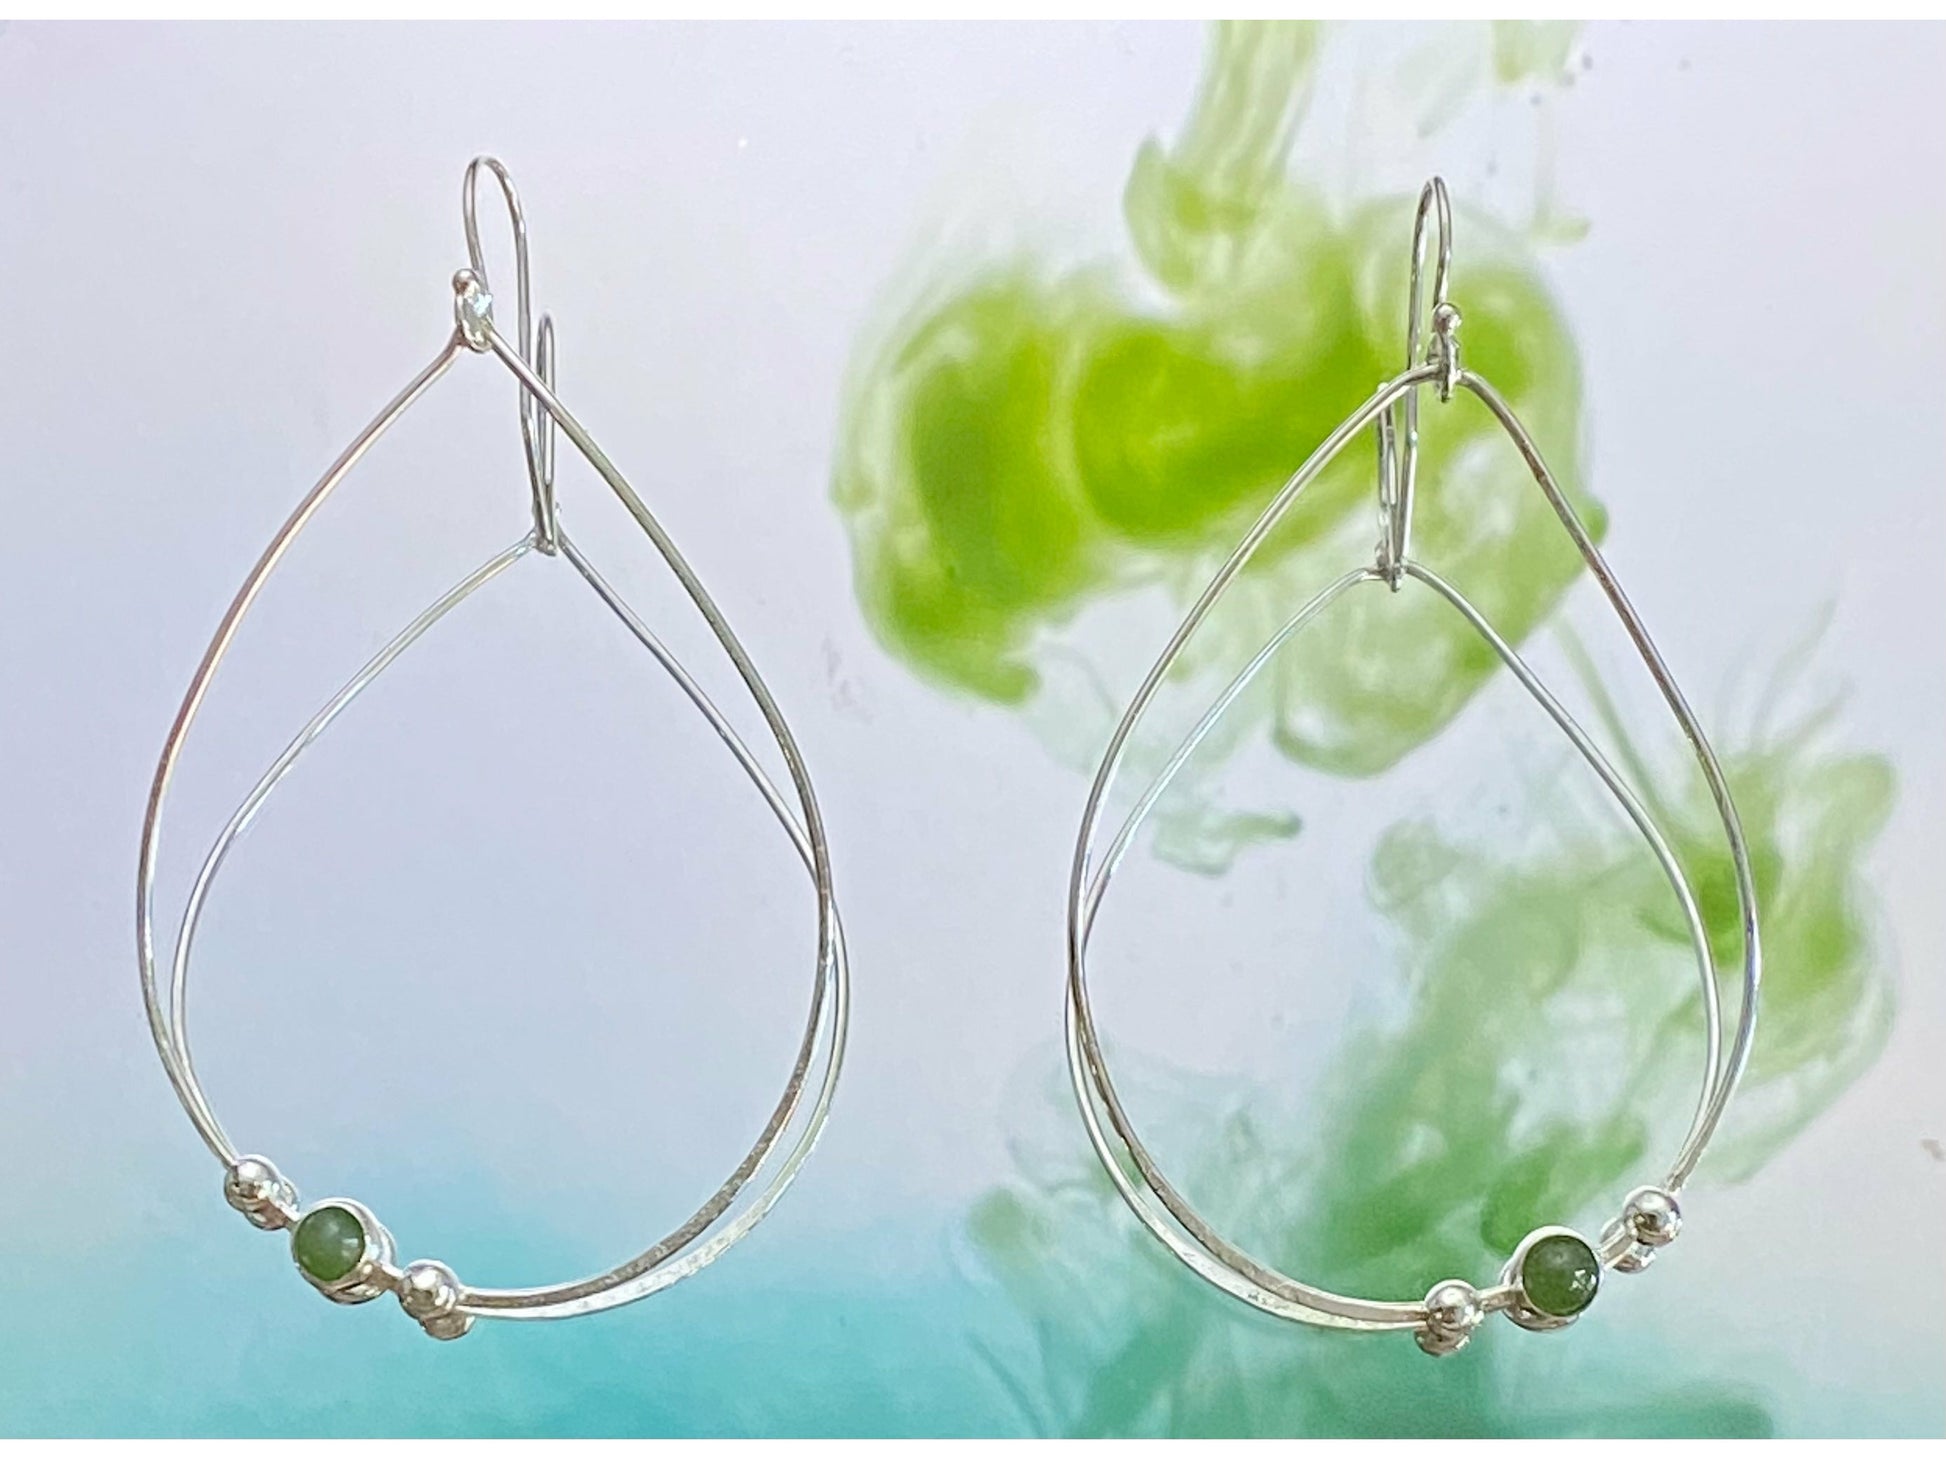 Teardrop gold or silver earrings with two dots of silver or gold offset to the left with a jade 3mm stone. Offset to the right in the right earring